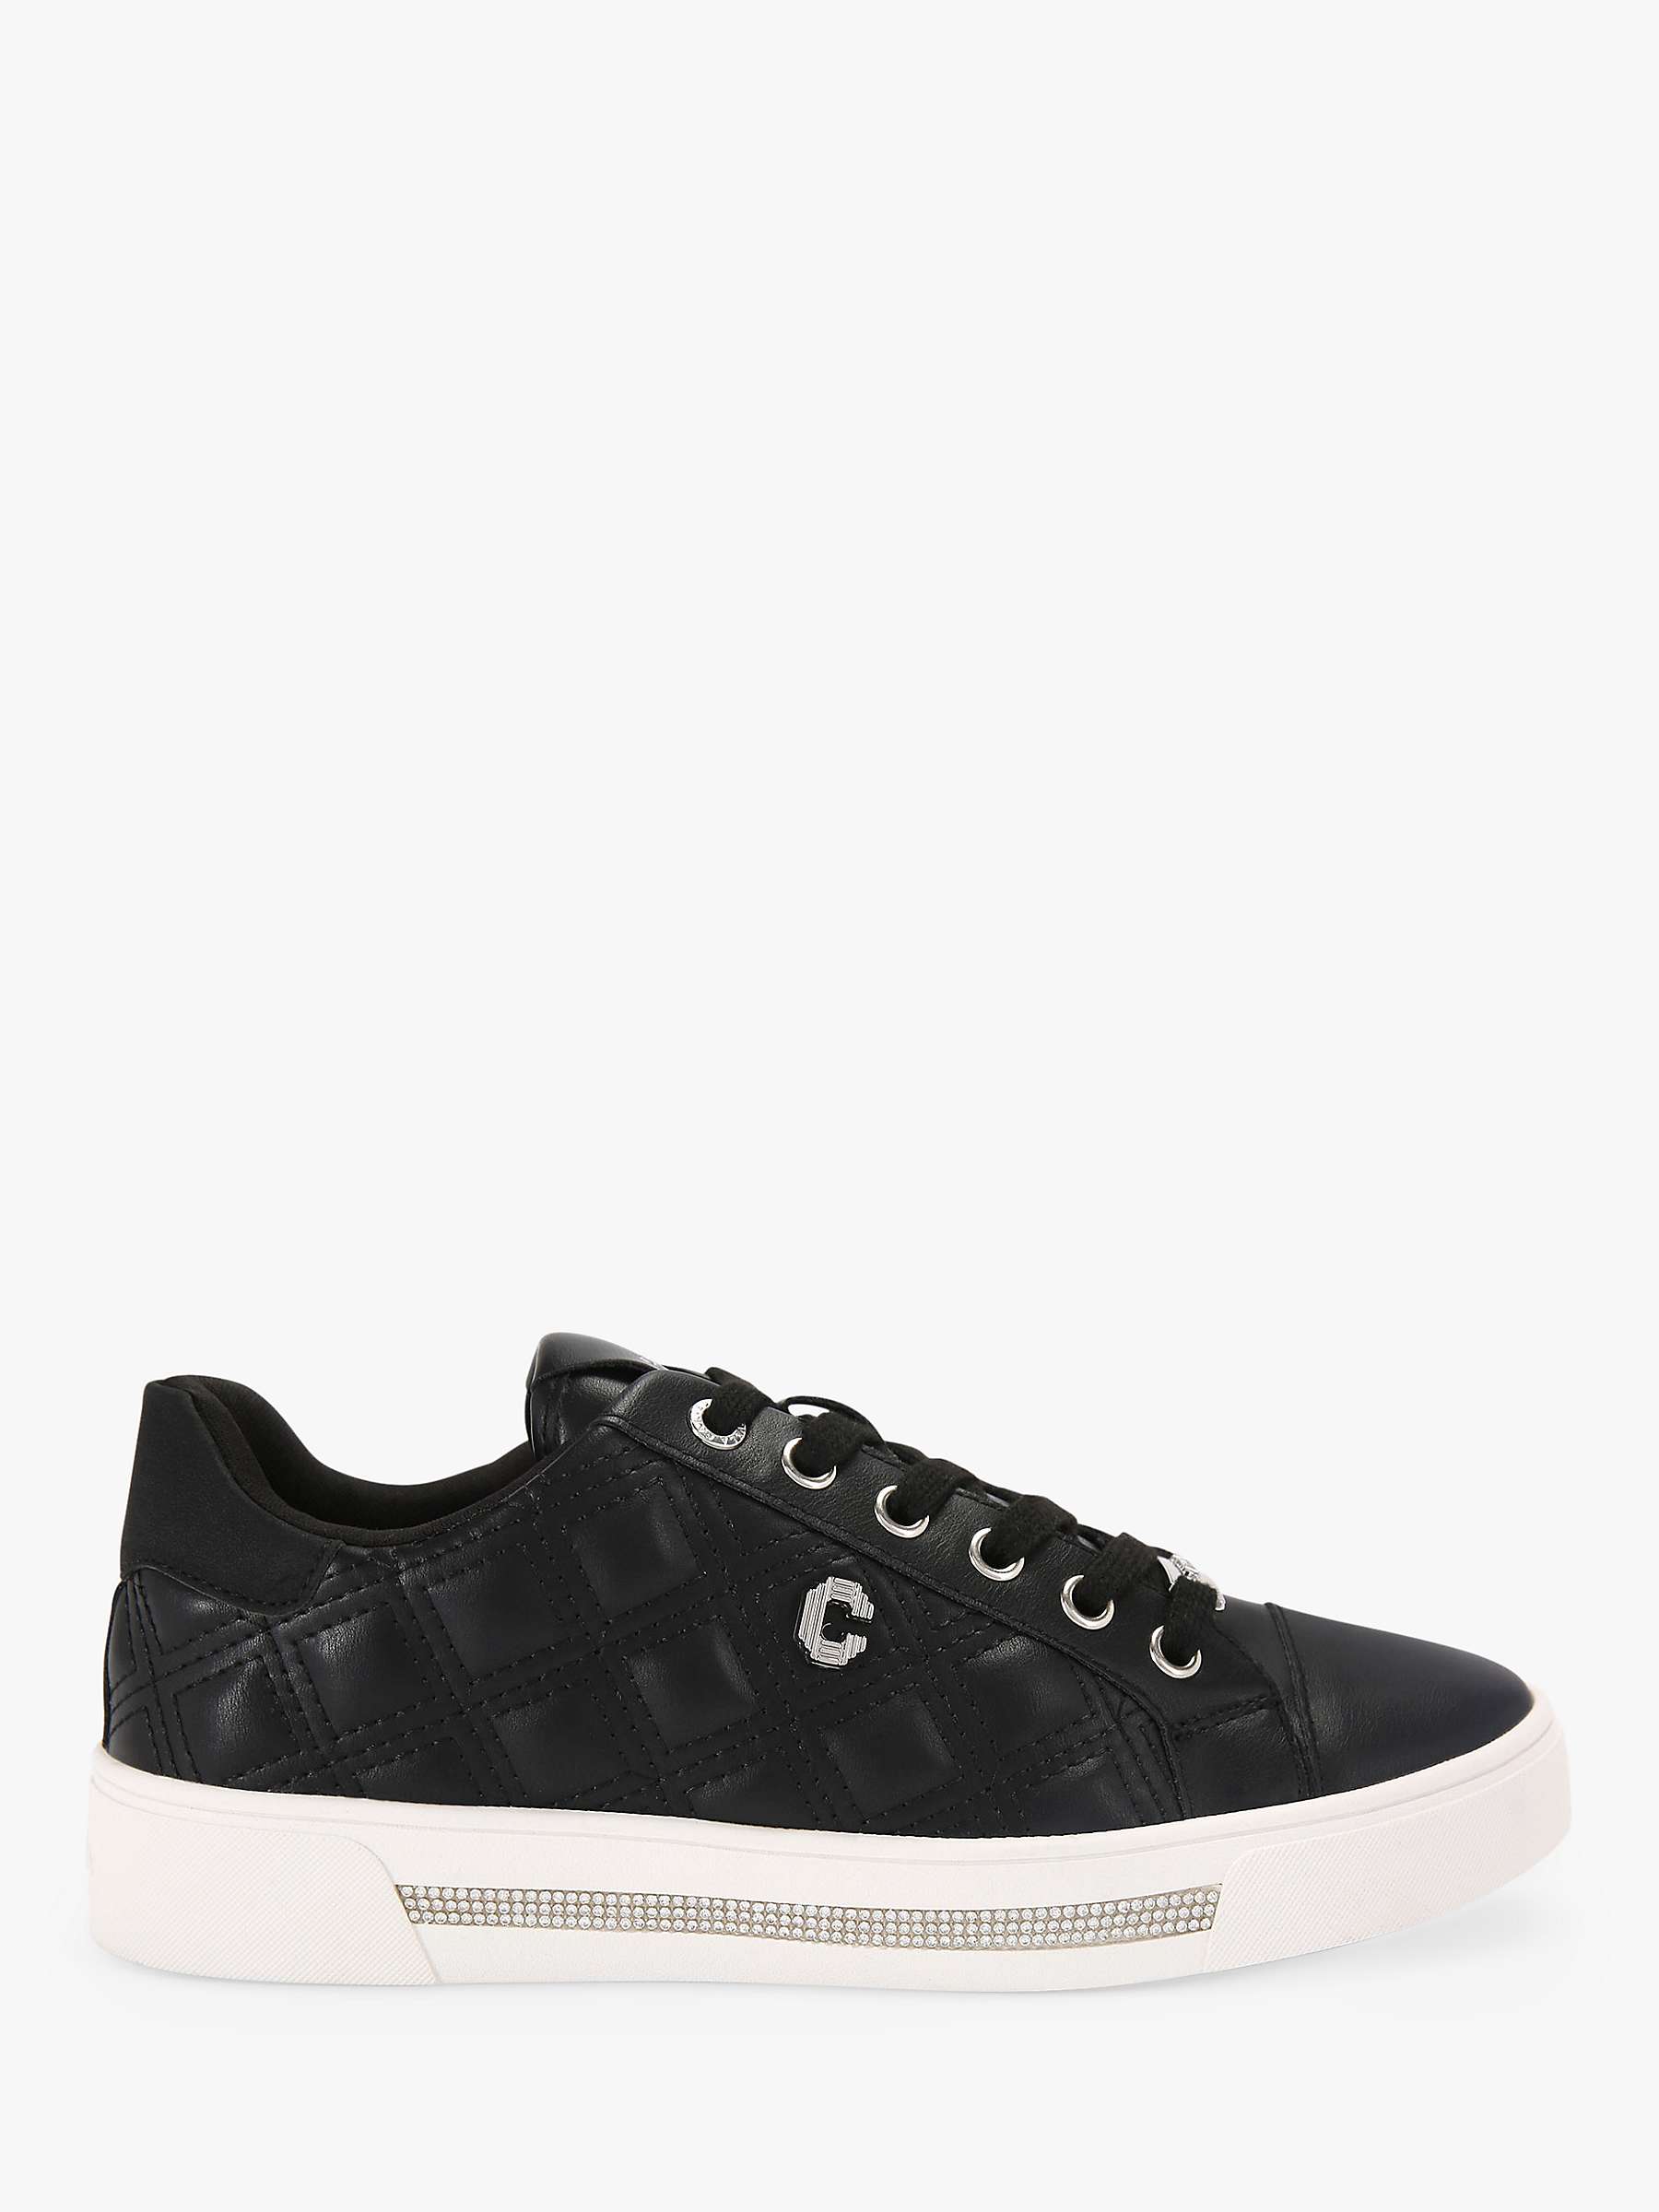 Buy Carvela Diamond Quilted Trainers, Black Online at johnlewis.com